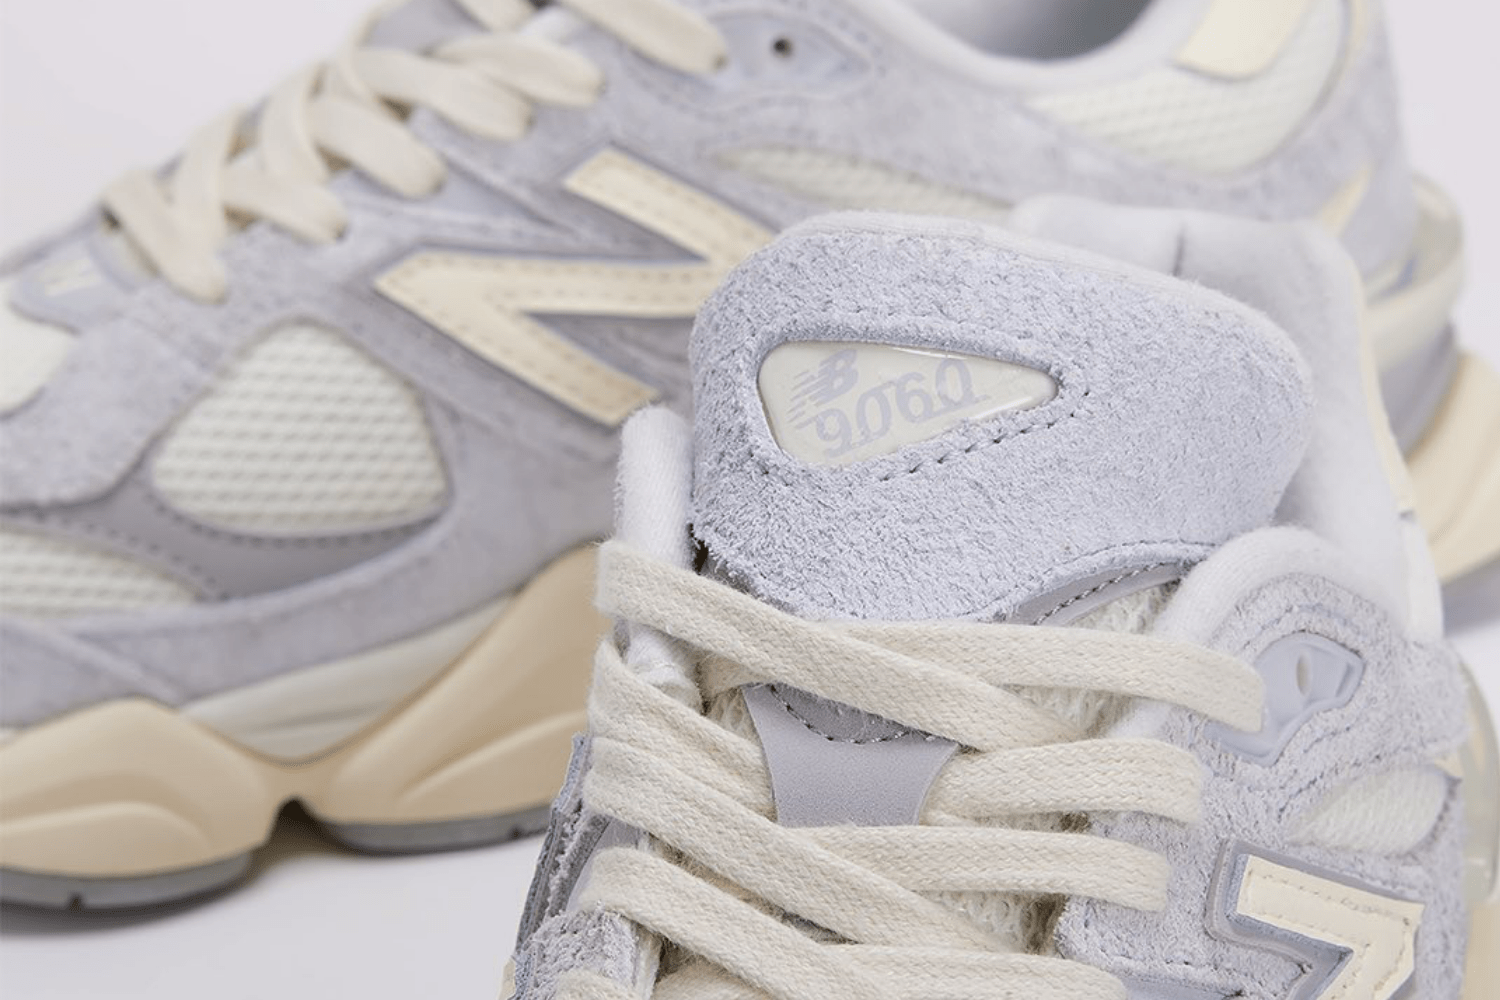 The New Balance 9060 is more popular than ever and here's why